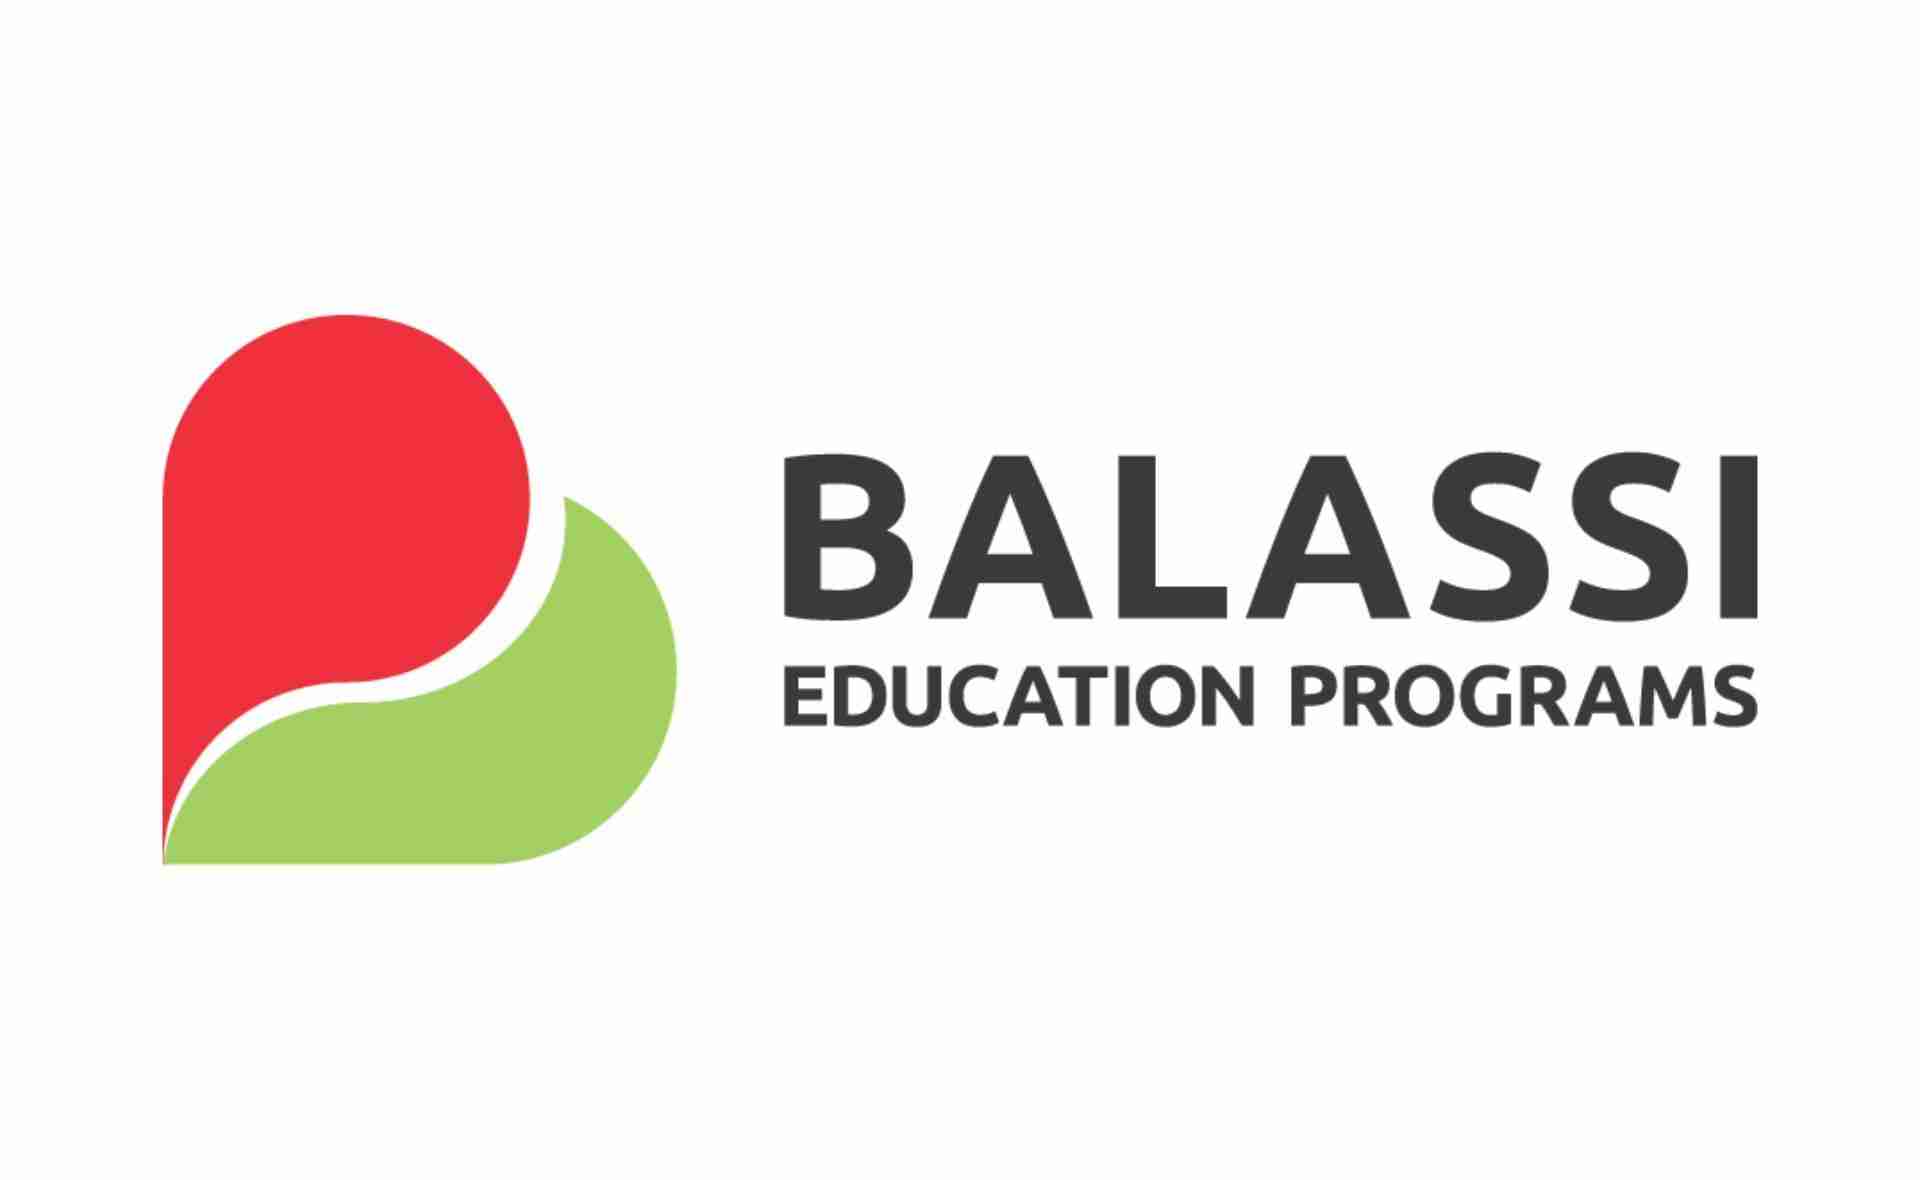 Applications are now open for the scholarships of the Balassi Education Program for the 2023/2024 academic year